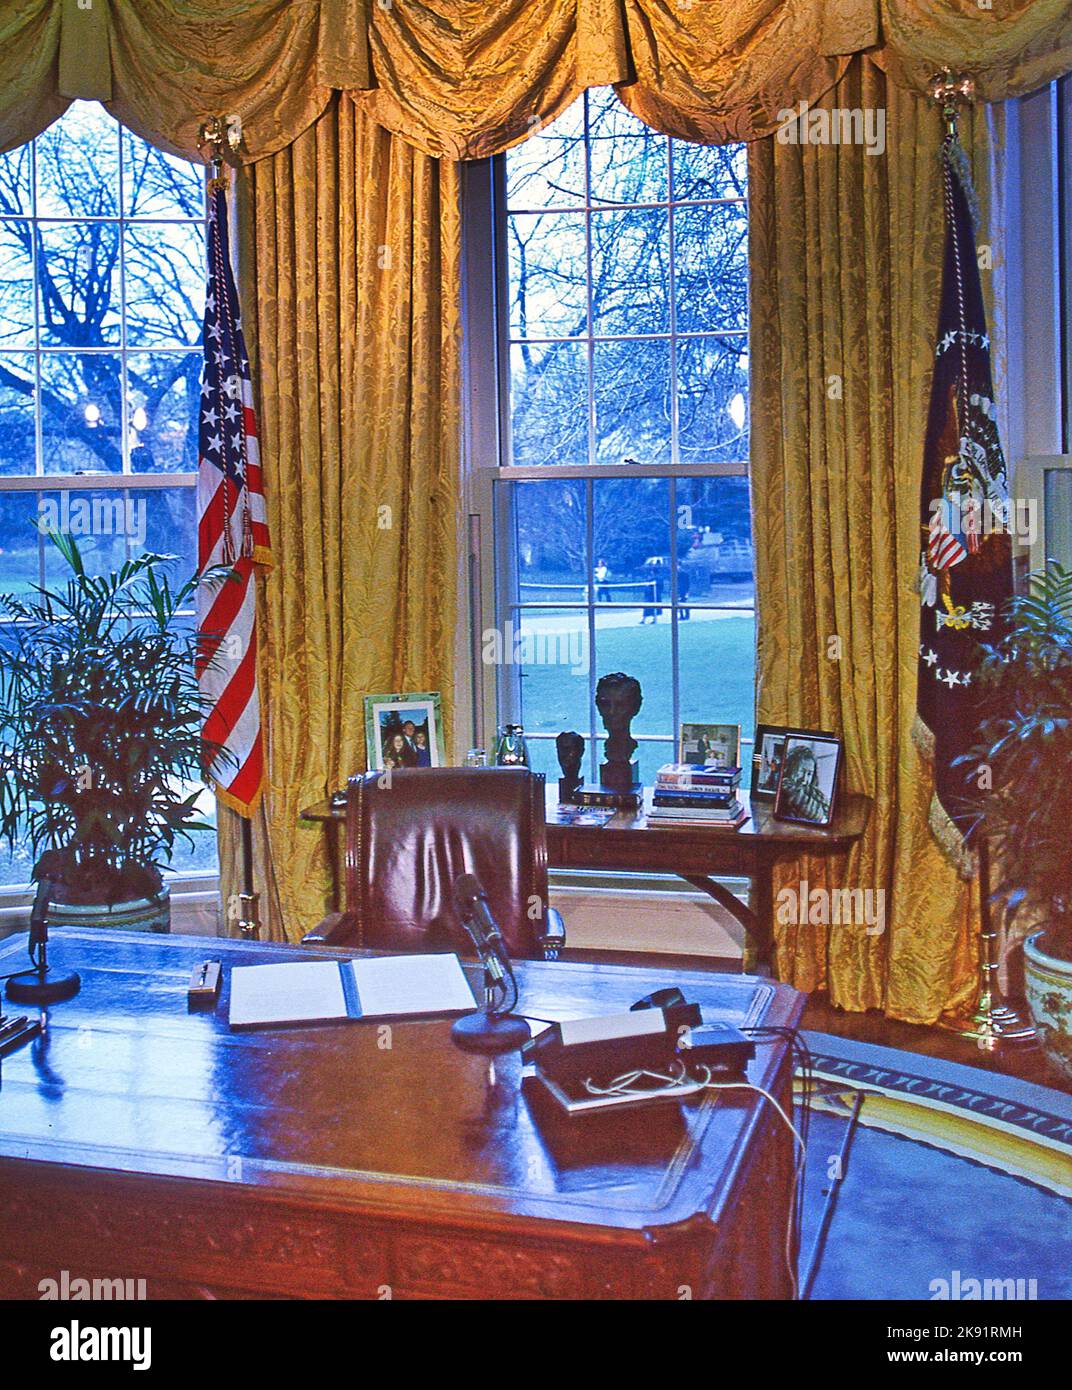 The Oval Offic3 during the administration of President William Clinton.  Photo by   Dennis Brack. bb85 Stock Photo